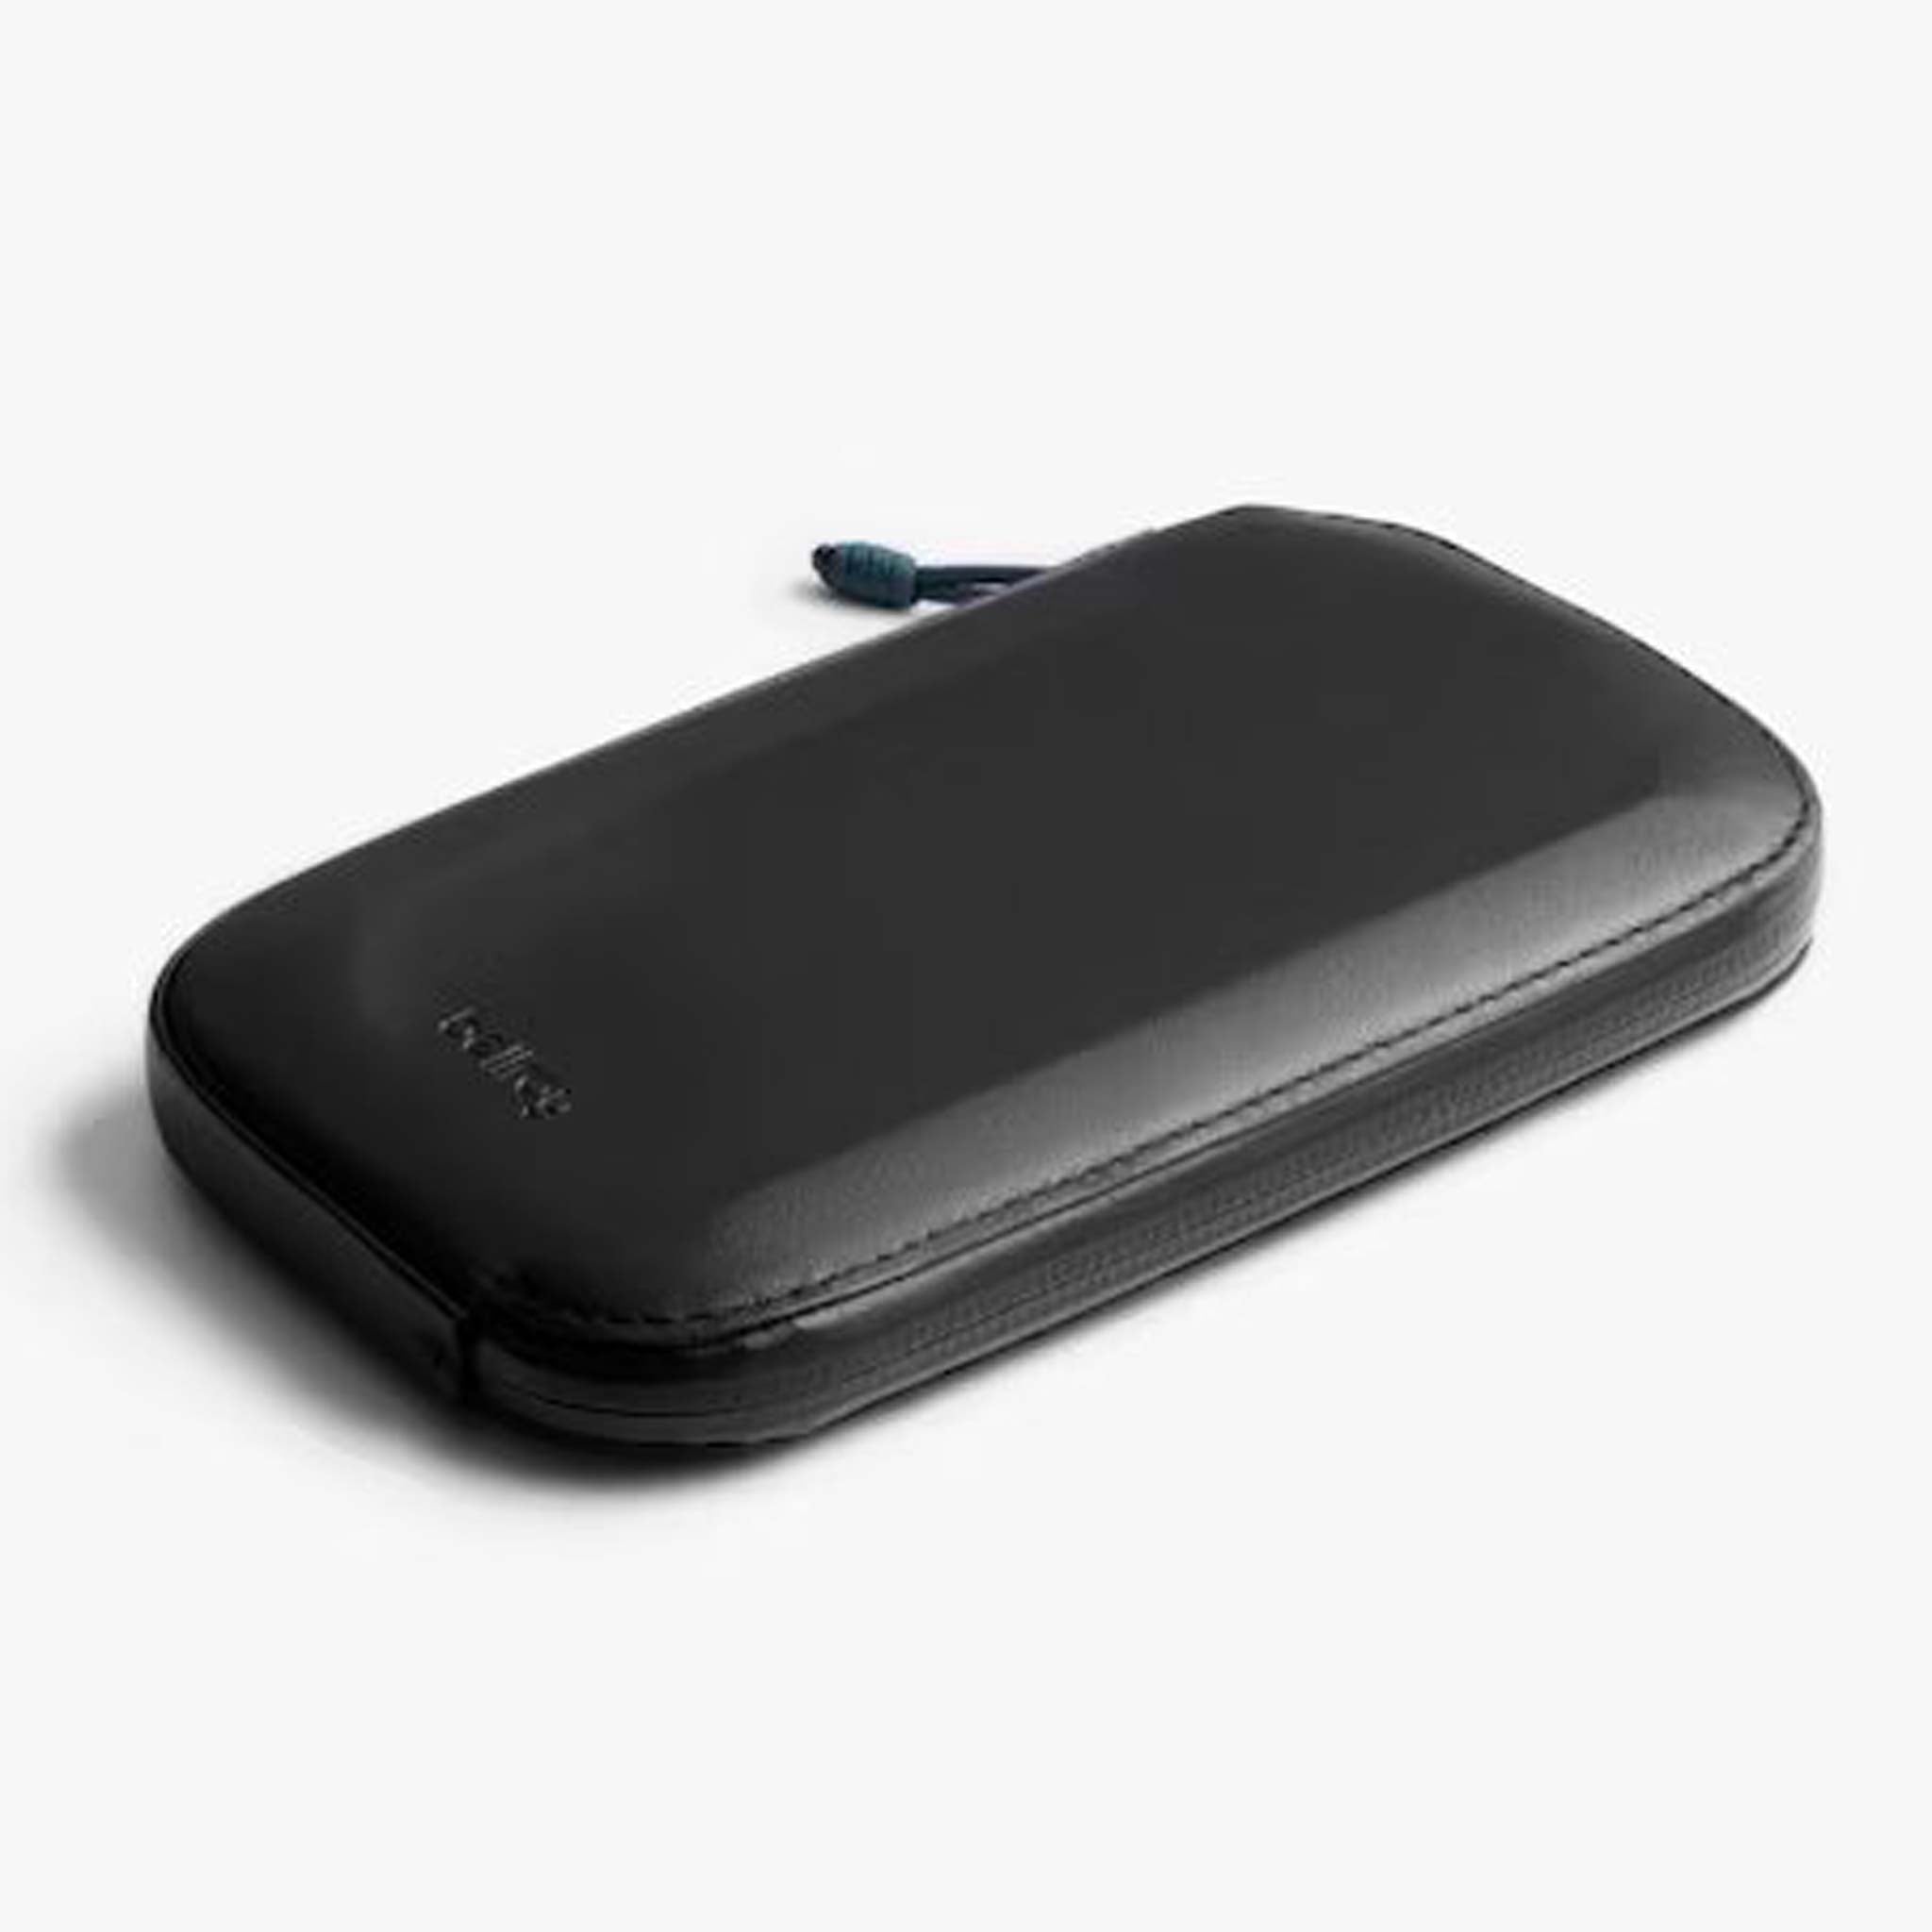 All-Conditions Phone Pocket